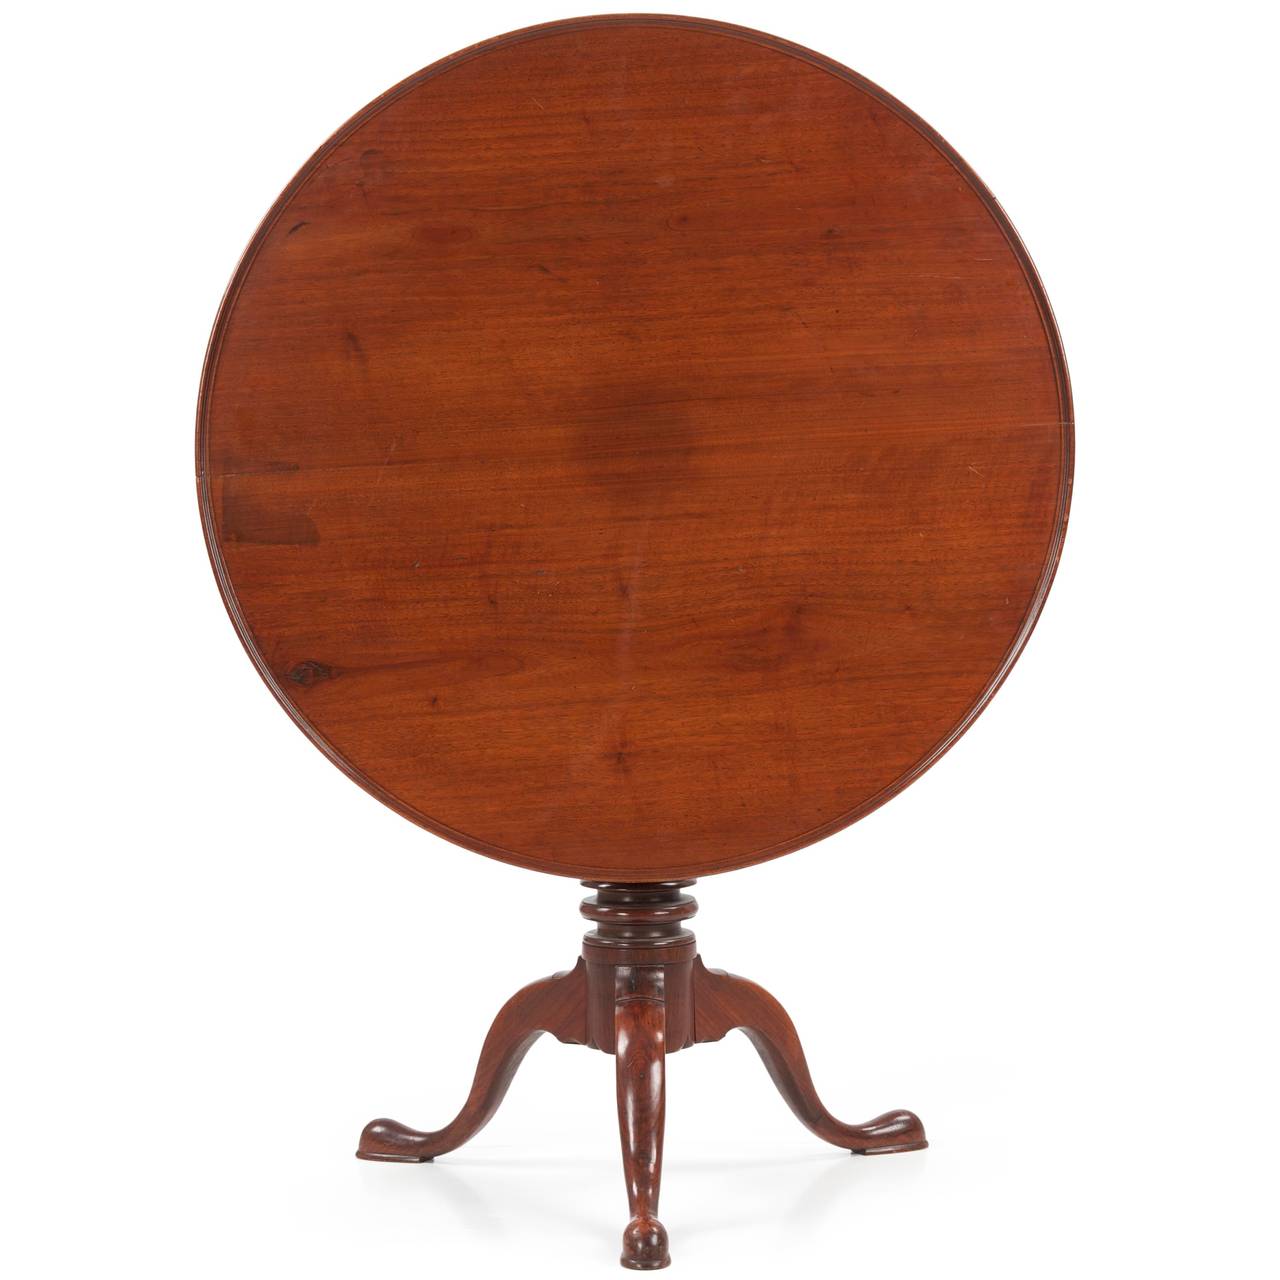 AMERICAN QUEEN ANNE WALNUT TEA TABLE CIRCA 1770
Chester County, Pennsylvania w/ Birdcage Structure

This rare and very striking tea table is a fine example of rural ingenuity.  The distinctive raised tongue along the shoulder of the cabriole leg,